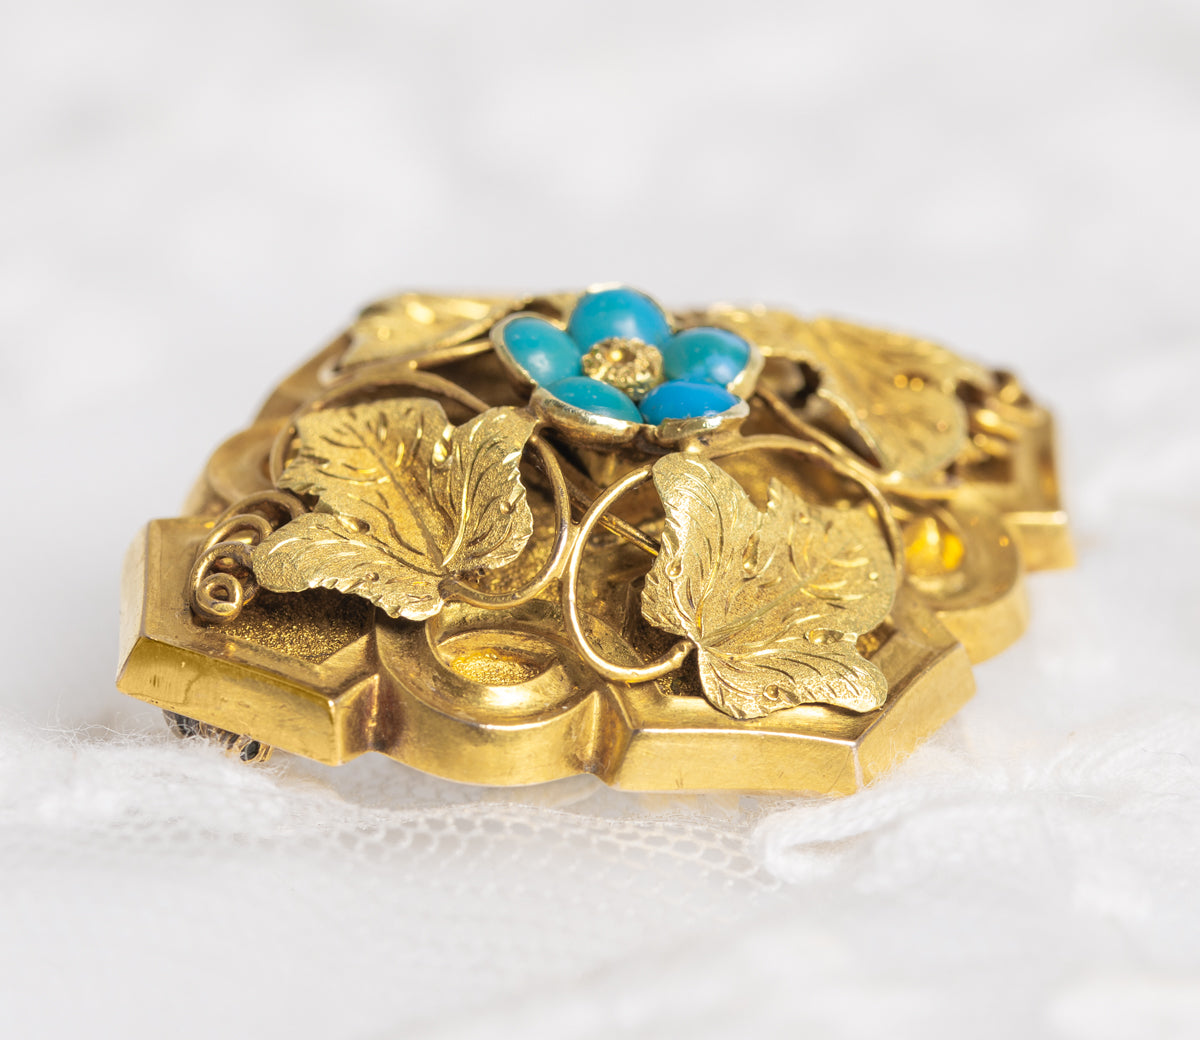 Antique Victorian 18ct Gold & Turquoise Sweetheart / Remembrance Brooch / Pin (A1393)